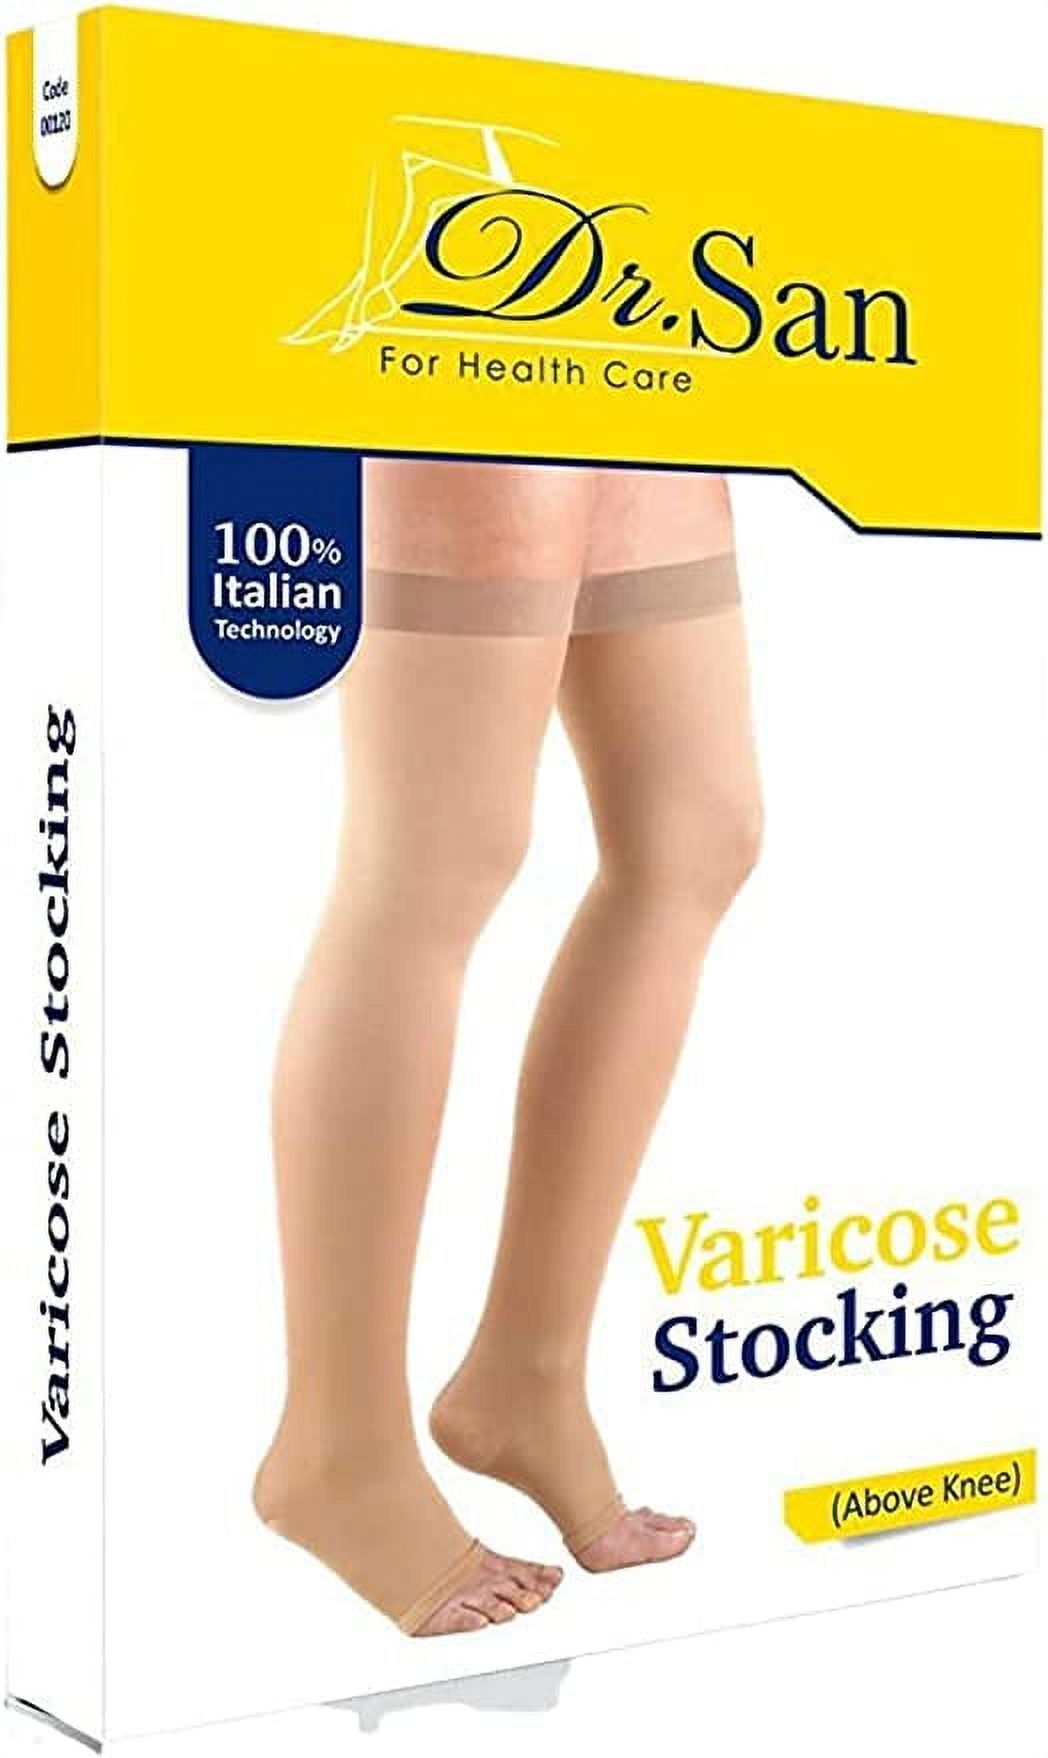 Dr. San Knee High Compression Socks 20-30mmHg Firm Support, Opaque,  Open-Toe, Unisex, Maternity Pregnancy, Varicose Veins, Swelling, Pain  Relief, Shin Splint, Above Knee, Size Extra Large 2 Pack 